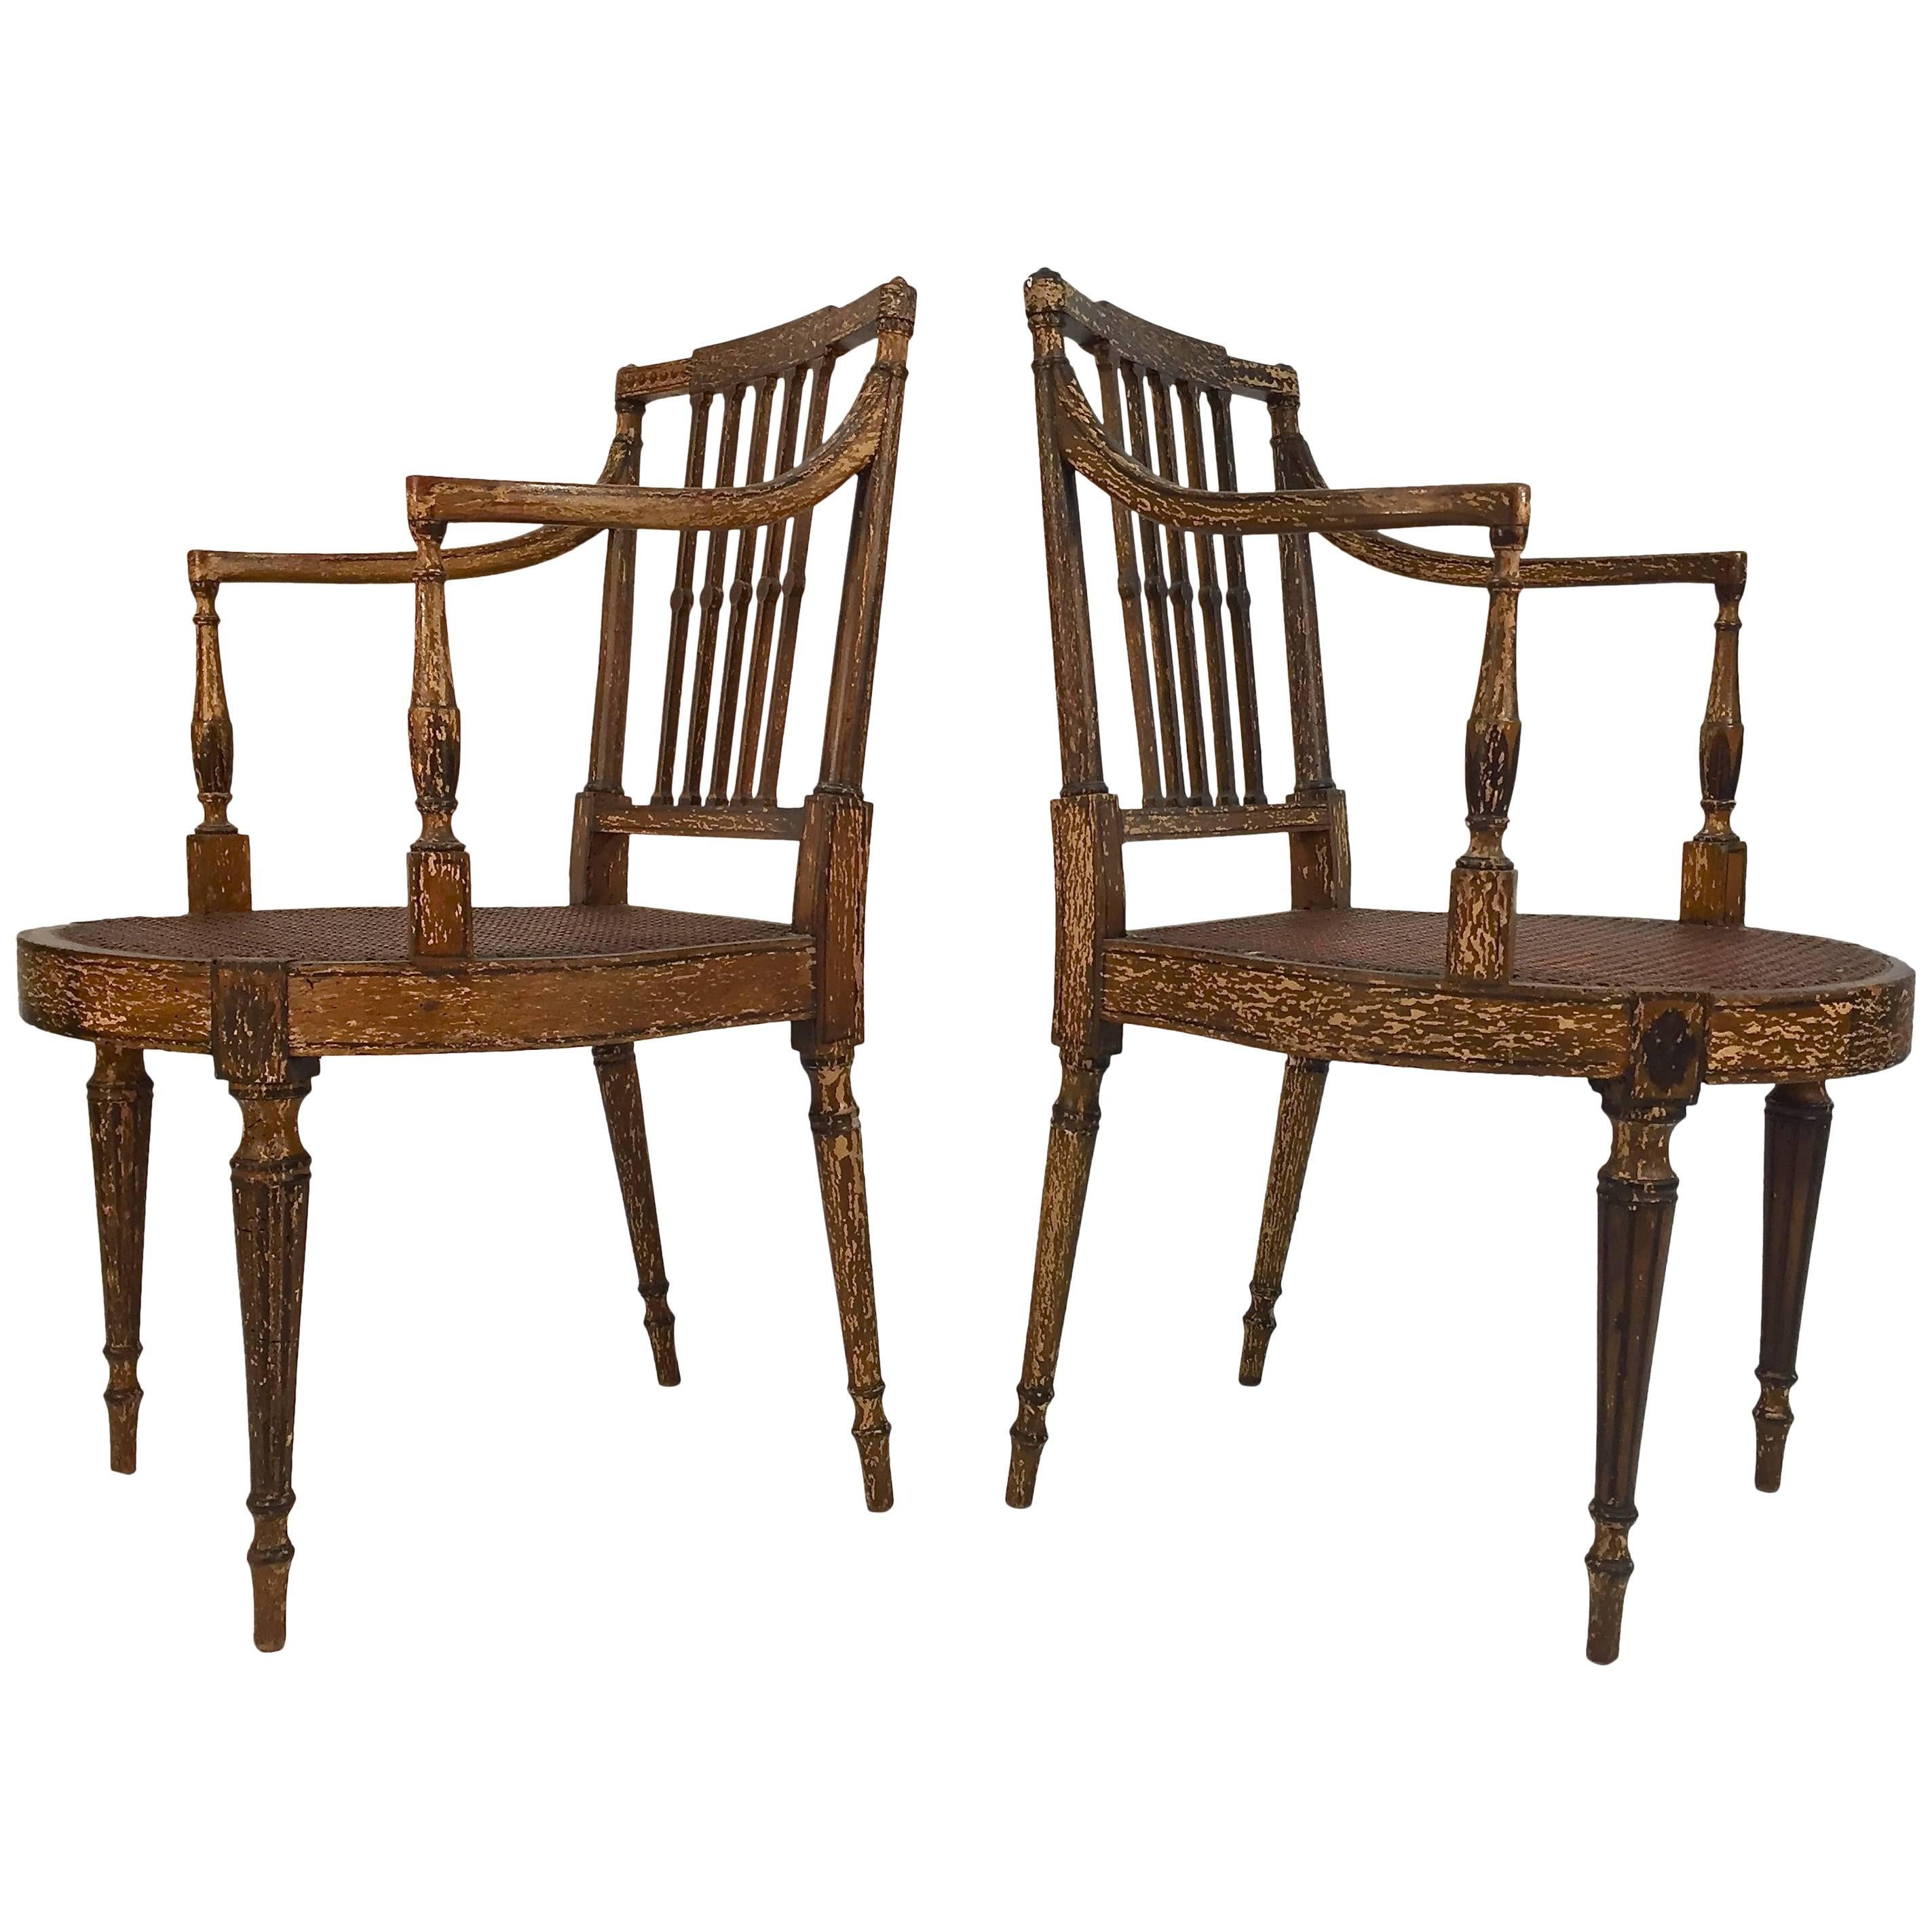 19th Century Painted English Regency Cane Seat Armchairs For Sale